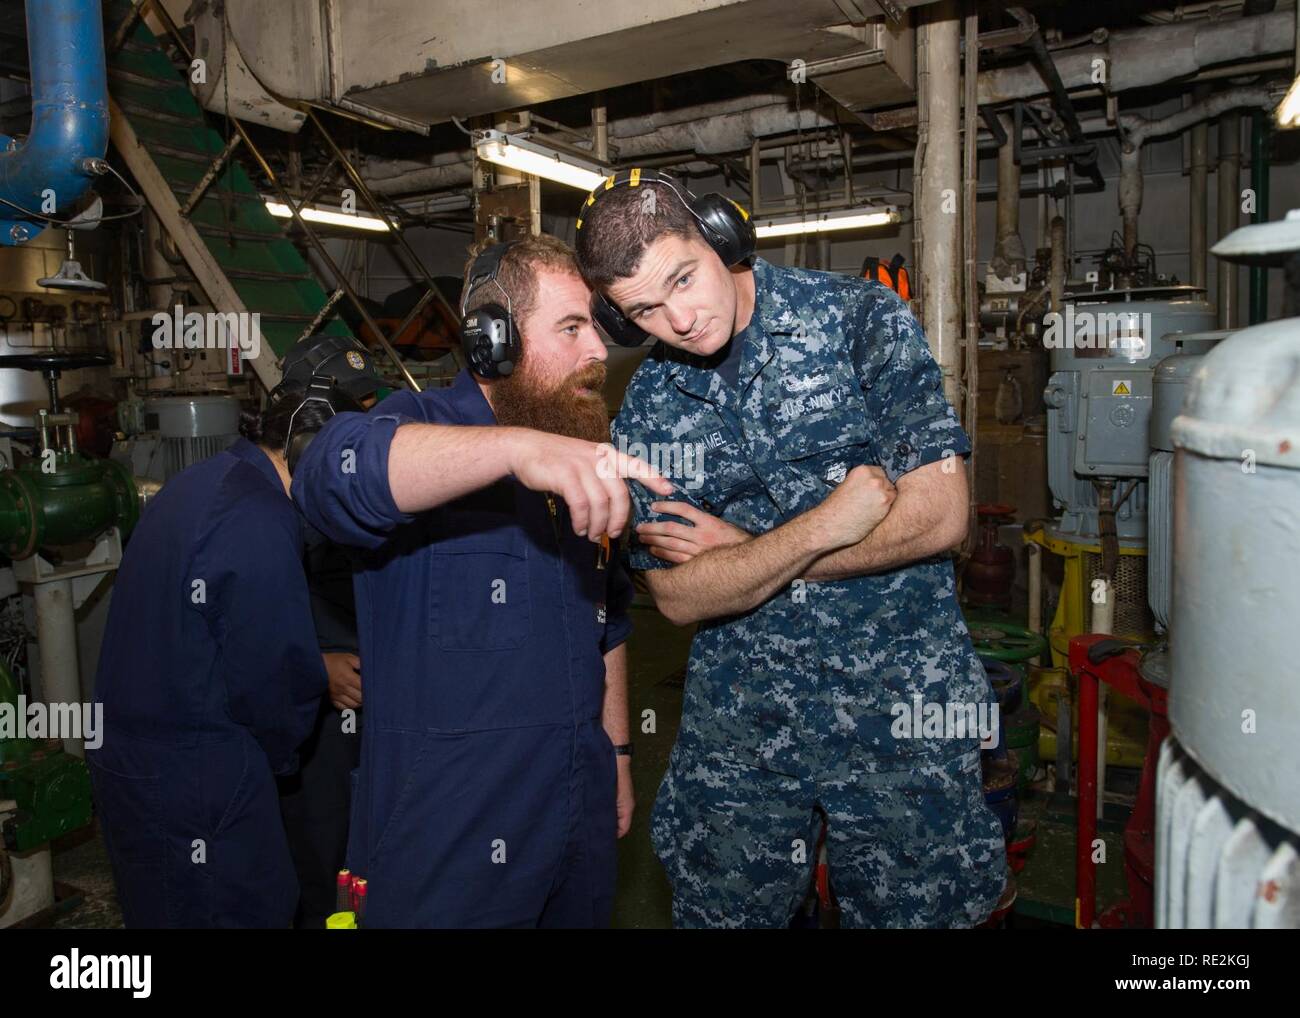 PACIFIC OCEAN (Nov. 12, 2016) – Arleigh Burke-class guided-missile destroyer USS Sampson (DDG 102) sailor Petty officer 3rd Class Brian Duhamel, right, receives a tour of the ship engine space from Royal New Zealand Navy Chief Andrew Walsh aboard Her Majesty’s New Zealand Ship Endeavour. Sampson will report to U.S. Third Fleet, headquartered in San Diego, while deployed to the Western Pacific as part of the U.S. Pacific Fleet-led initiative to extend the command and control functions of Third Fleet into the region. Stock Photo